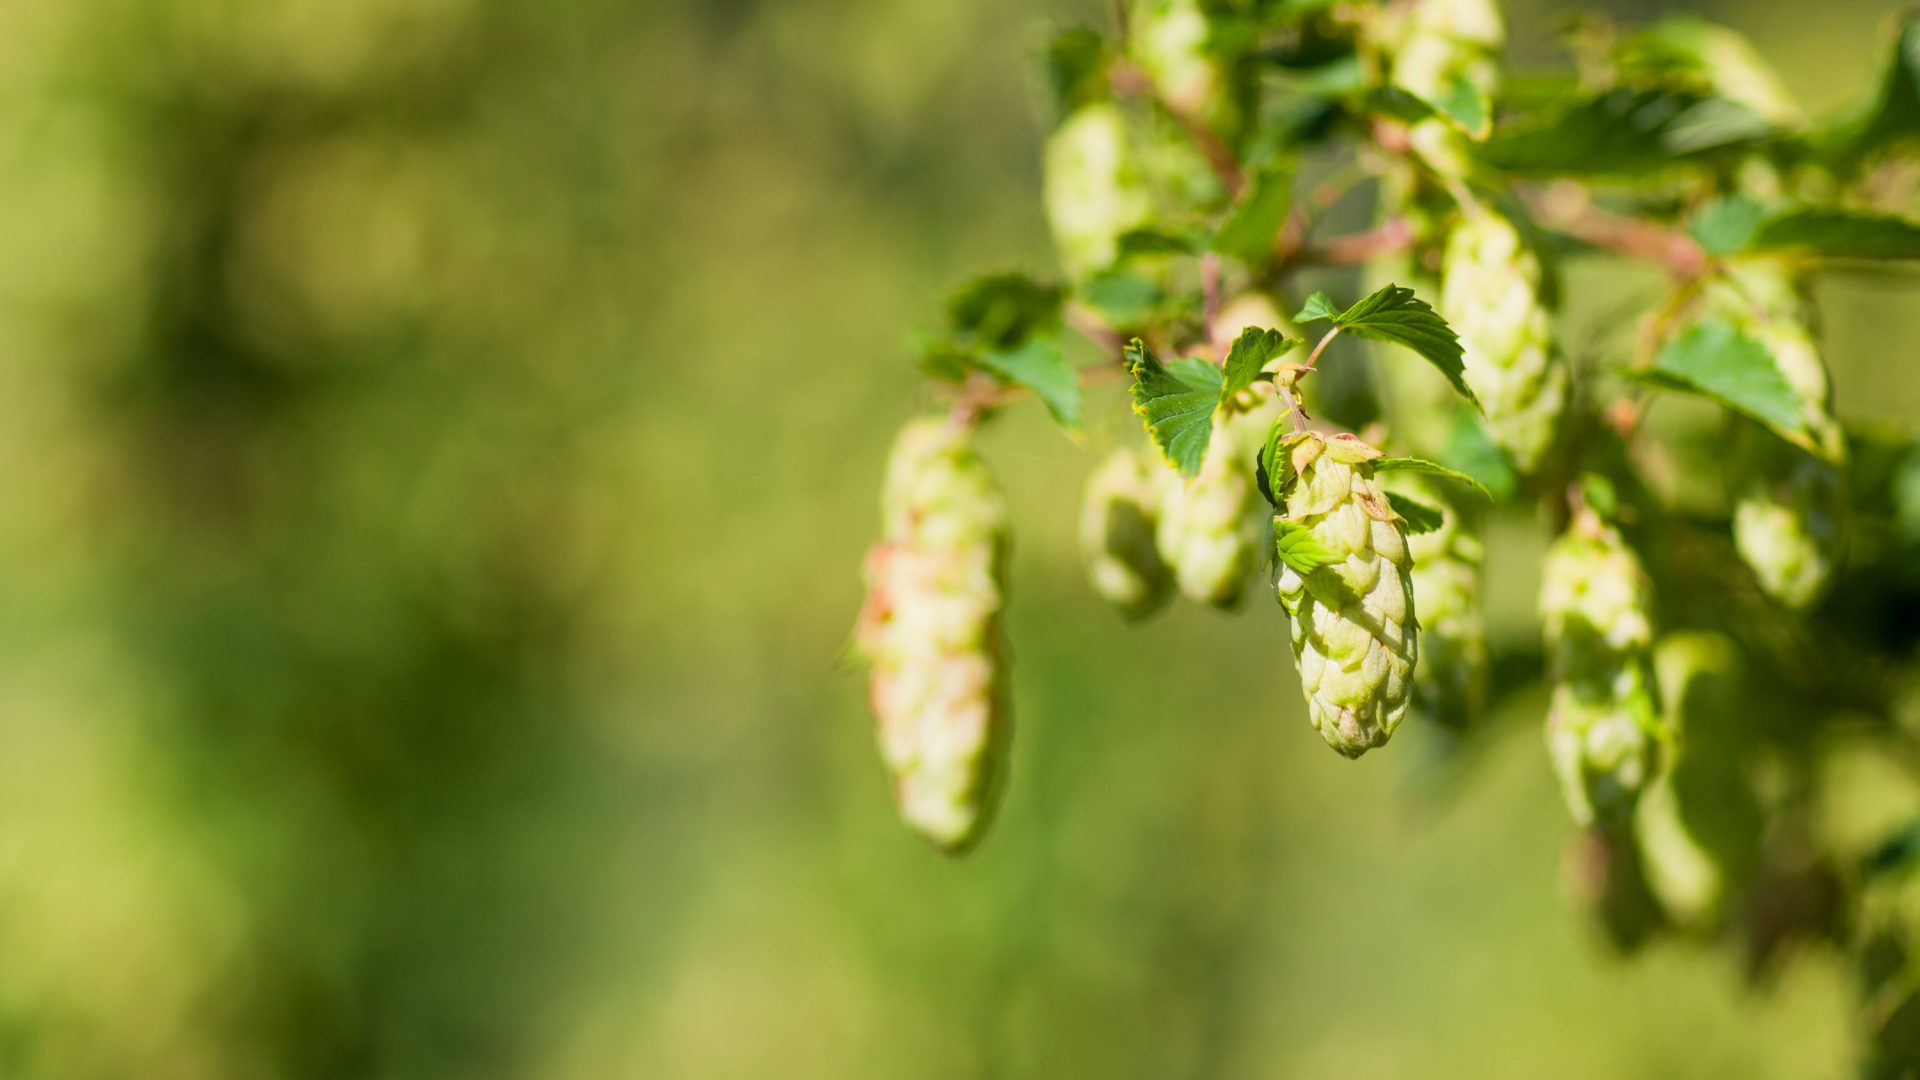 Hops growing on a plant.